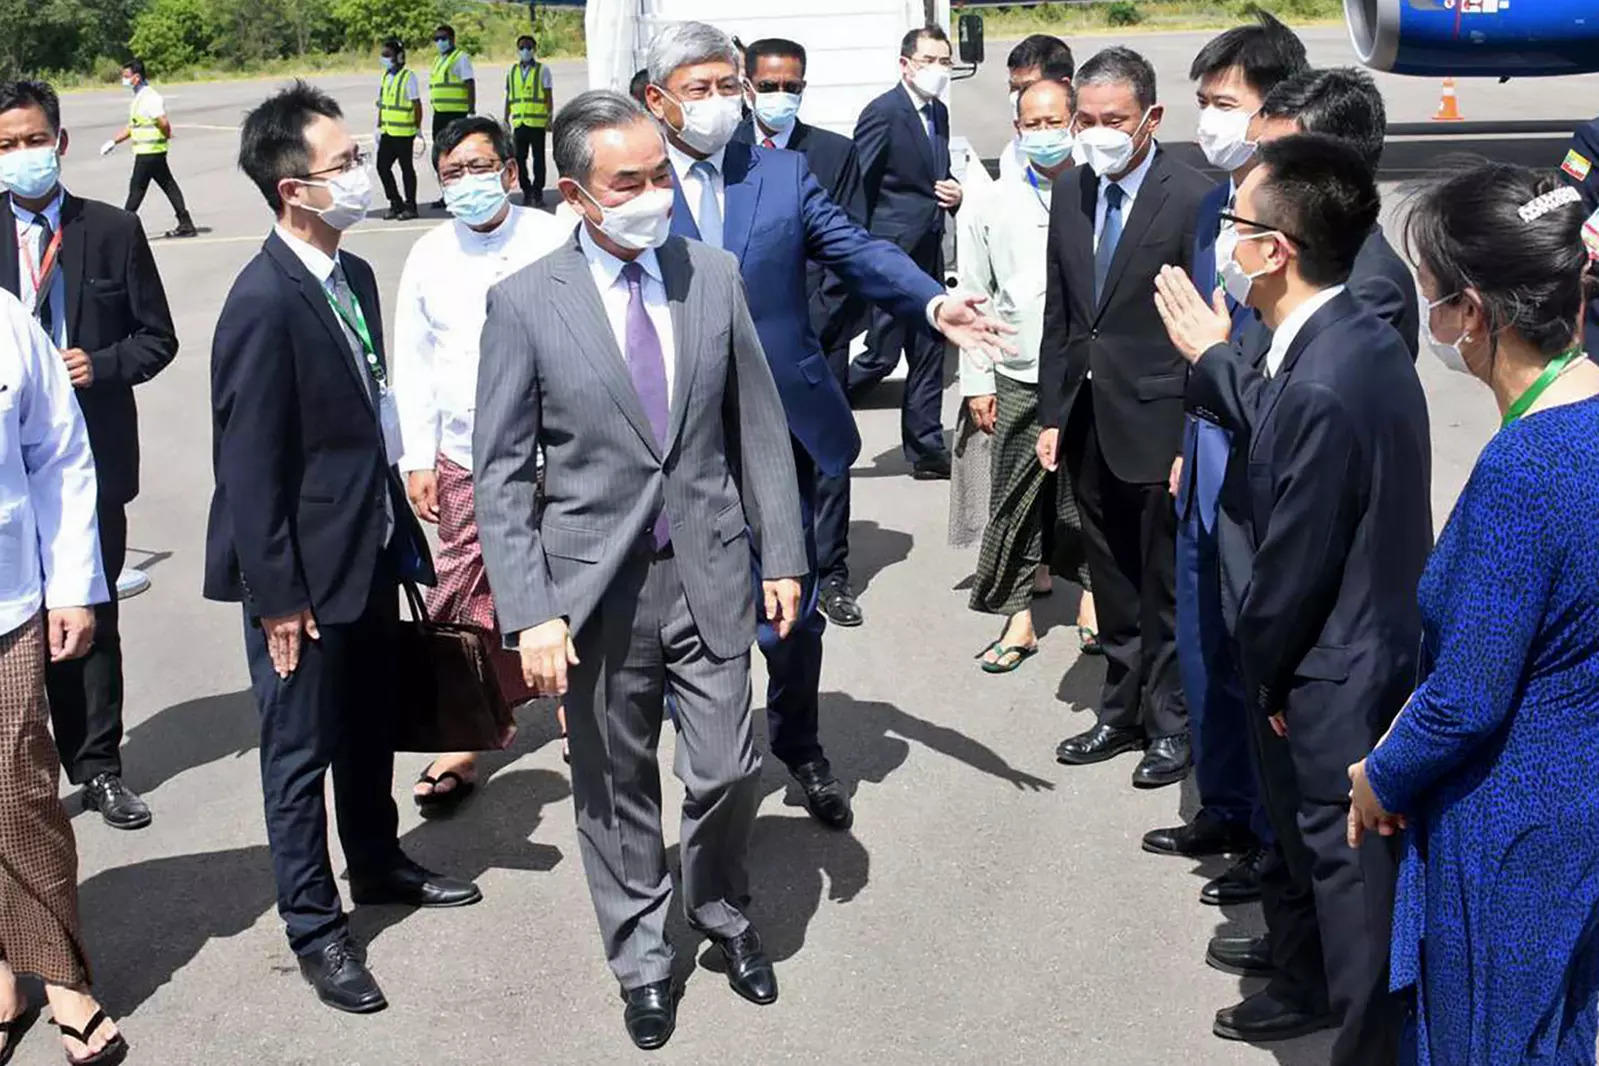 Chinese foreign minister Wang Yi (centre) is welcomed by Myanmar Foreign Ministry representatives and Chinese embassy officials upon his arrival at Nyaung Oo Airport in Bagan, Myanmar, Saturday July 2, 2022. (File photo: AP)